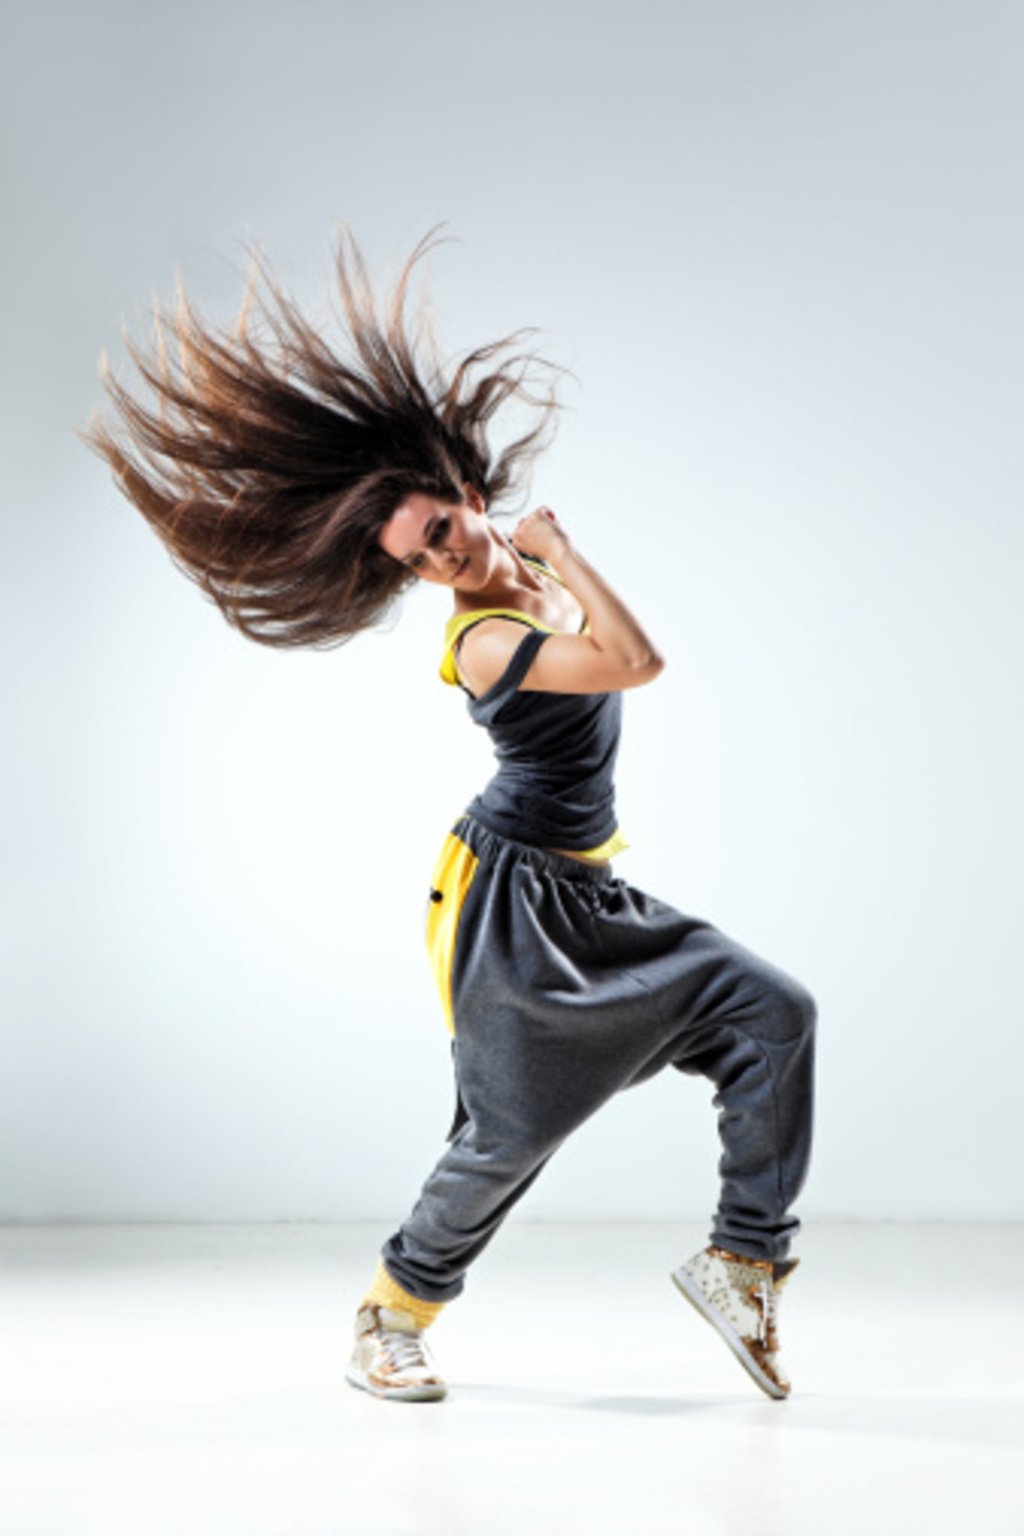 500+ Zumba Pictures | Download Free Images on Unsplash